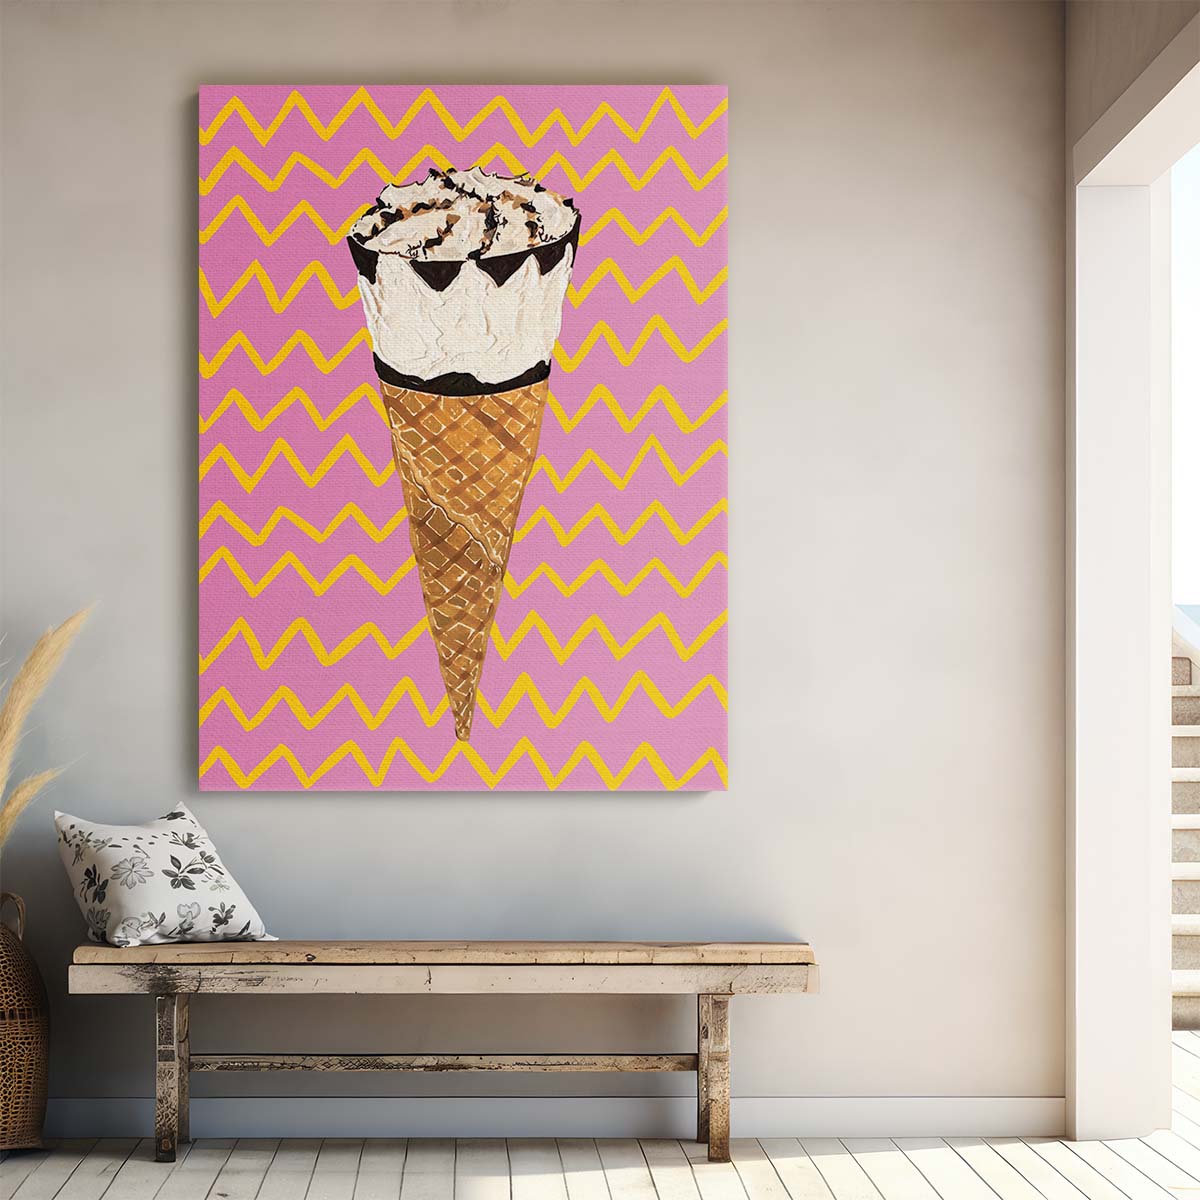 Colorful Geometric Abstract Cornetto Ice Cream Illustration Wall Art by Luxuriance Designs, made in USA